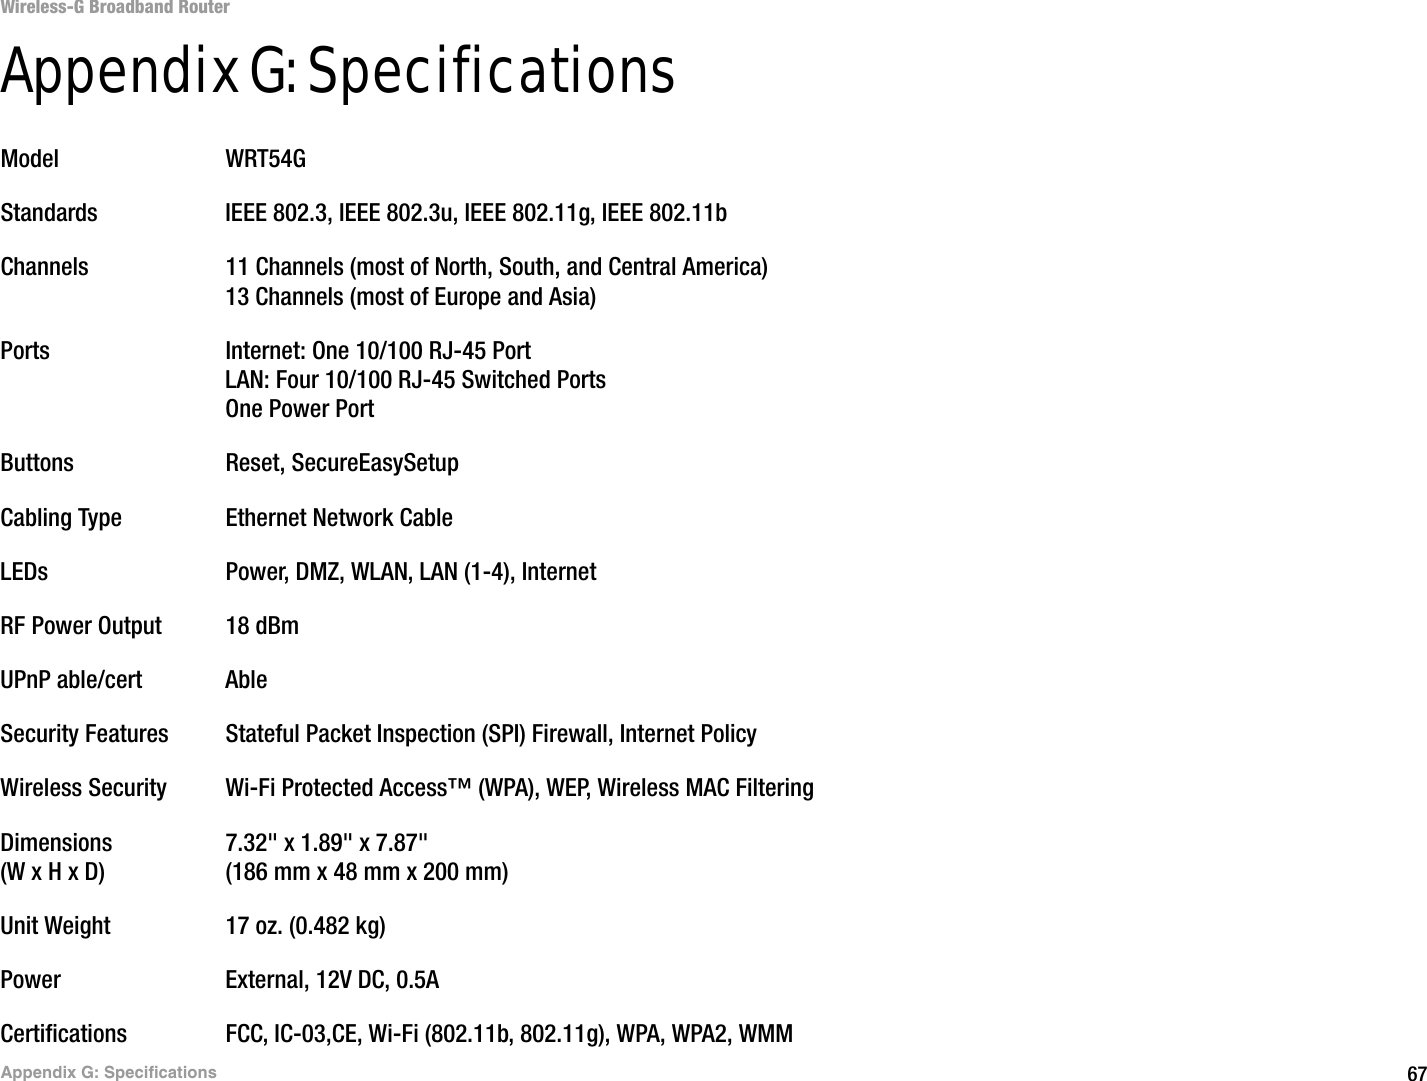 67Appendix G: SpecificationsWireless-G Broadband RouterAppendix G: SpecificationsModel WRT54GStandards IEEE 802.3, IEEE 802.3u, IEEE 802.11g, IEEE 802.11bChannels 11 Channels (most of North, South, and Central America)13 Channels (most of Europe and Asia)Ports Internet: One 10/100 RJ-45 PortLAN: Four 10/100 RJ-45 Switched PortsOne Power PortButtons Reset, SecureEasySetupCabling Type Ethernet Network CableLEDs Power, DMZ, WLAN, LAN (1-4), InternetRF Power Output 18 dBmUPnP able/cert AbleSecurity Features Stateful Packet Inspection (SPI) Firewall, Internet PolicyWireless Security Wi-Fi Protected Access™ (WPA), WEP, Wireless MAC FilteringDimensions 7.32&quot; x 1.89&quot; x 7.87&quot;(W x H x D) (186 mm x 48 mm x 200 mm)Unit Weight 17 oz. (0.482 kg)Power External, 12V DC, 0.5ACertifications FCC, IC-03,CE, Wi-Fi (802.11b, 802.11g), WPA, WPA2, WMM